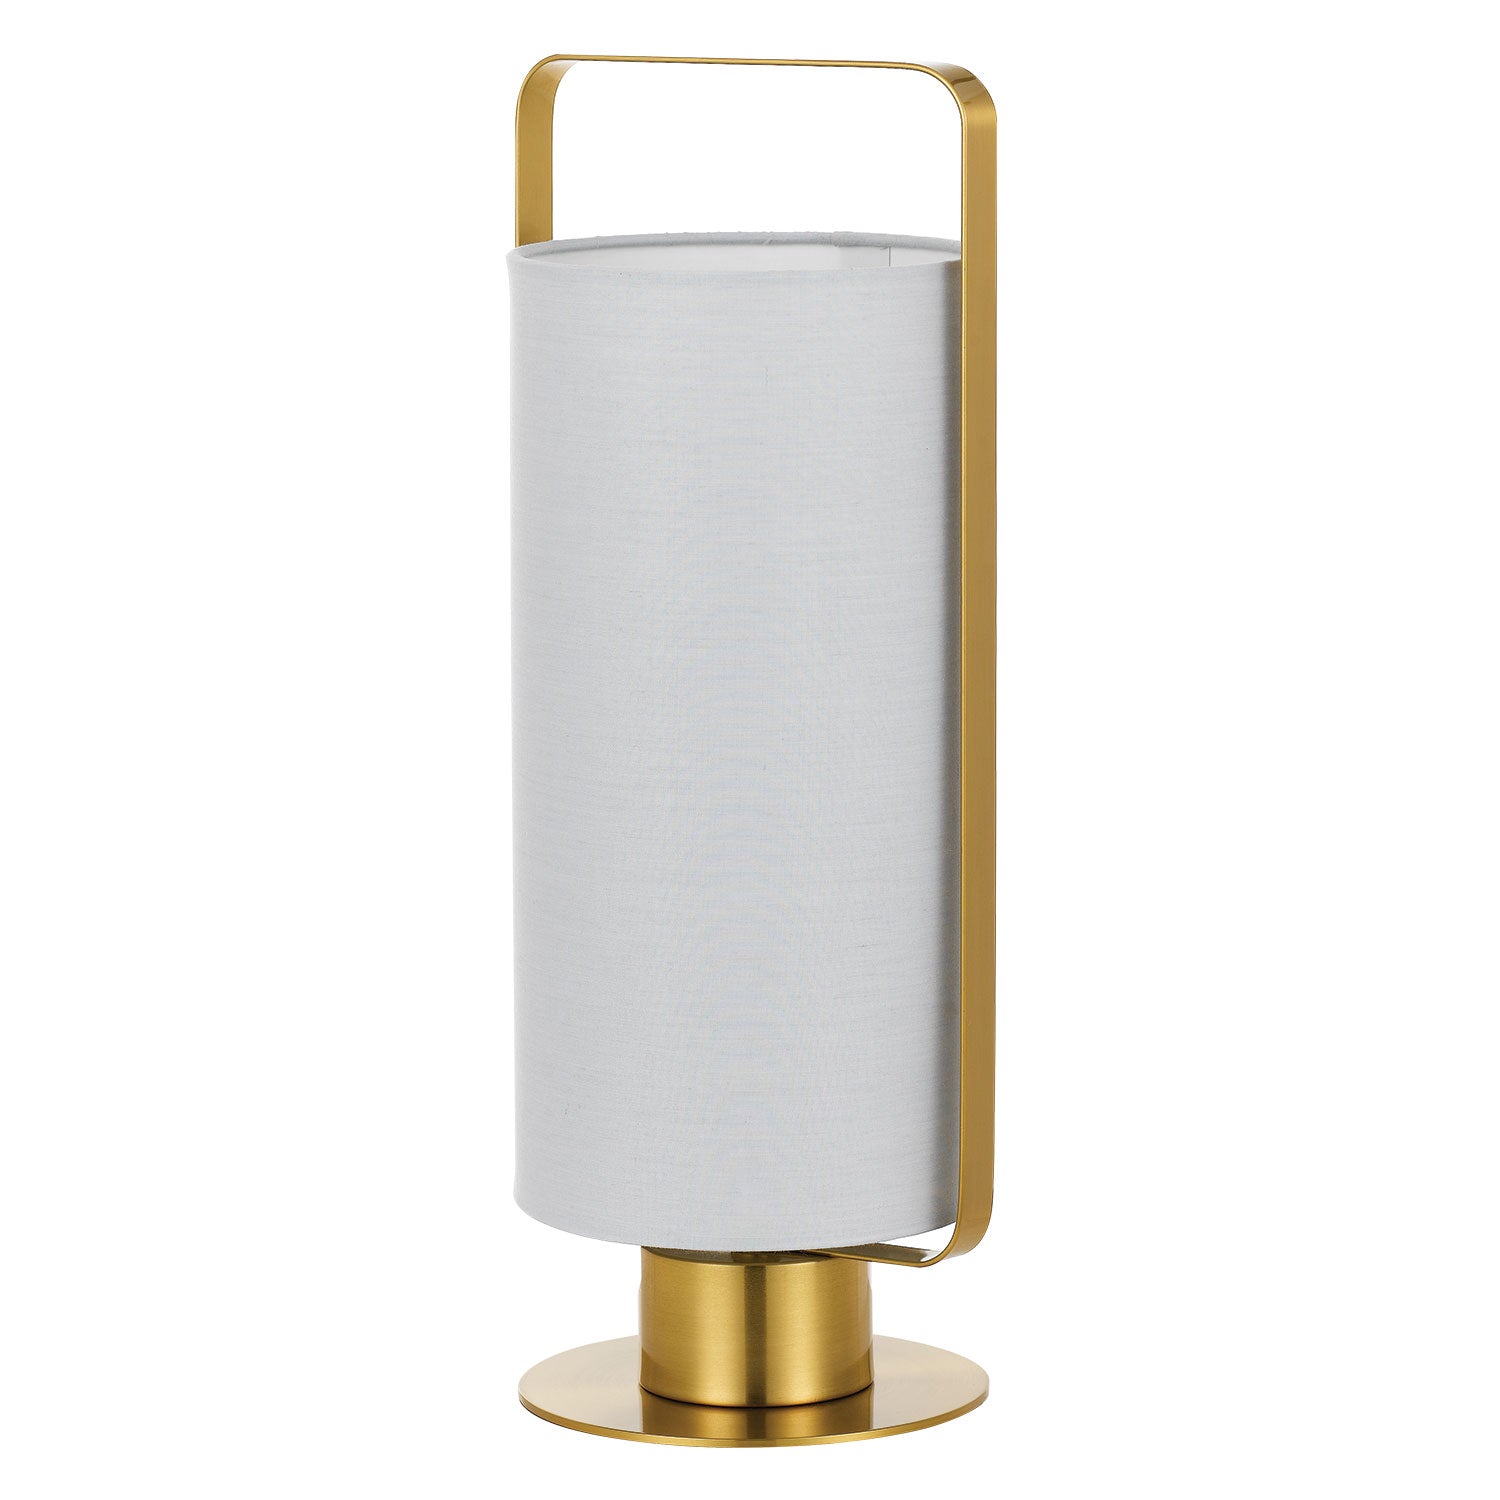 Orwel Grey and Antique Gold Modern Table Lamp